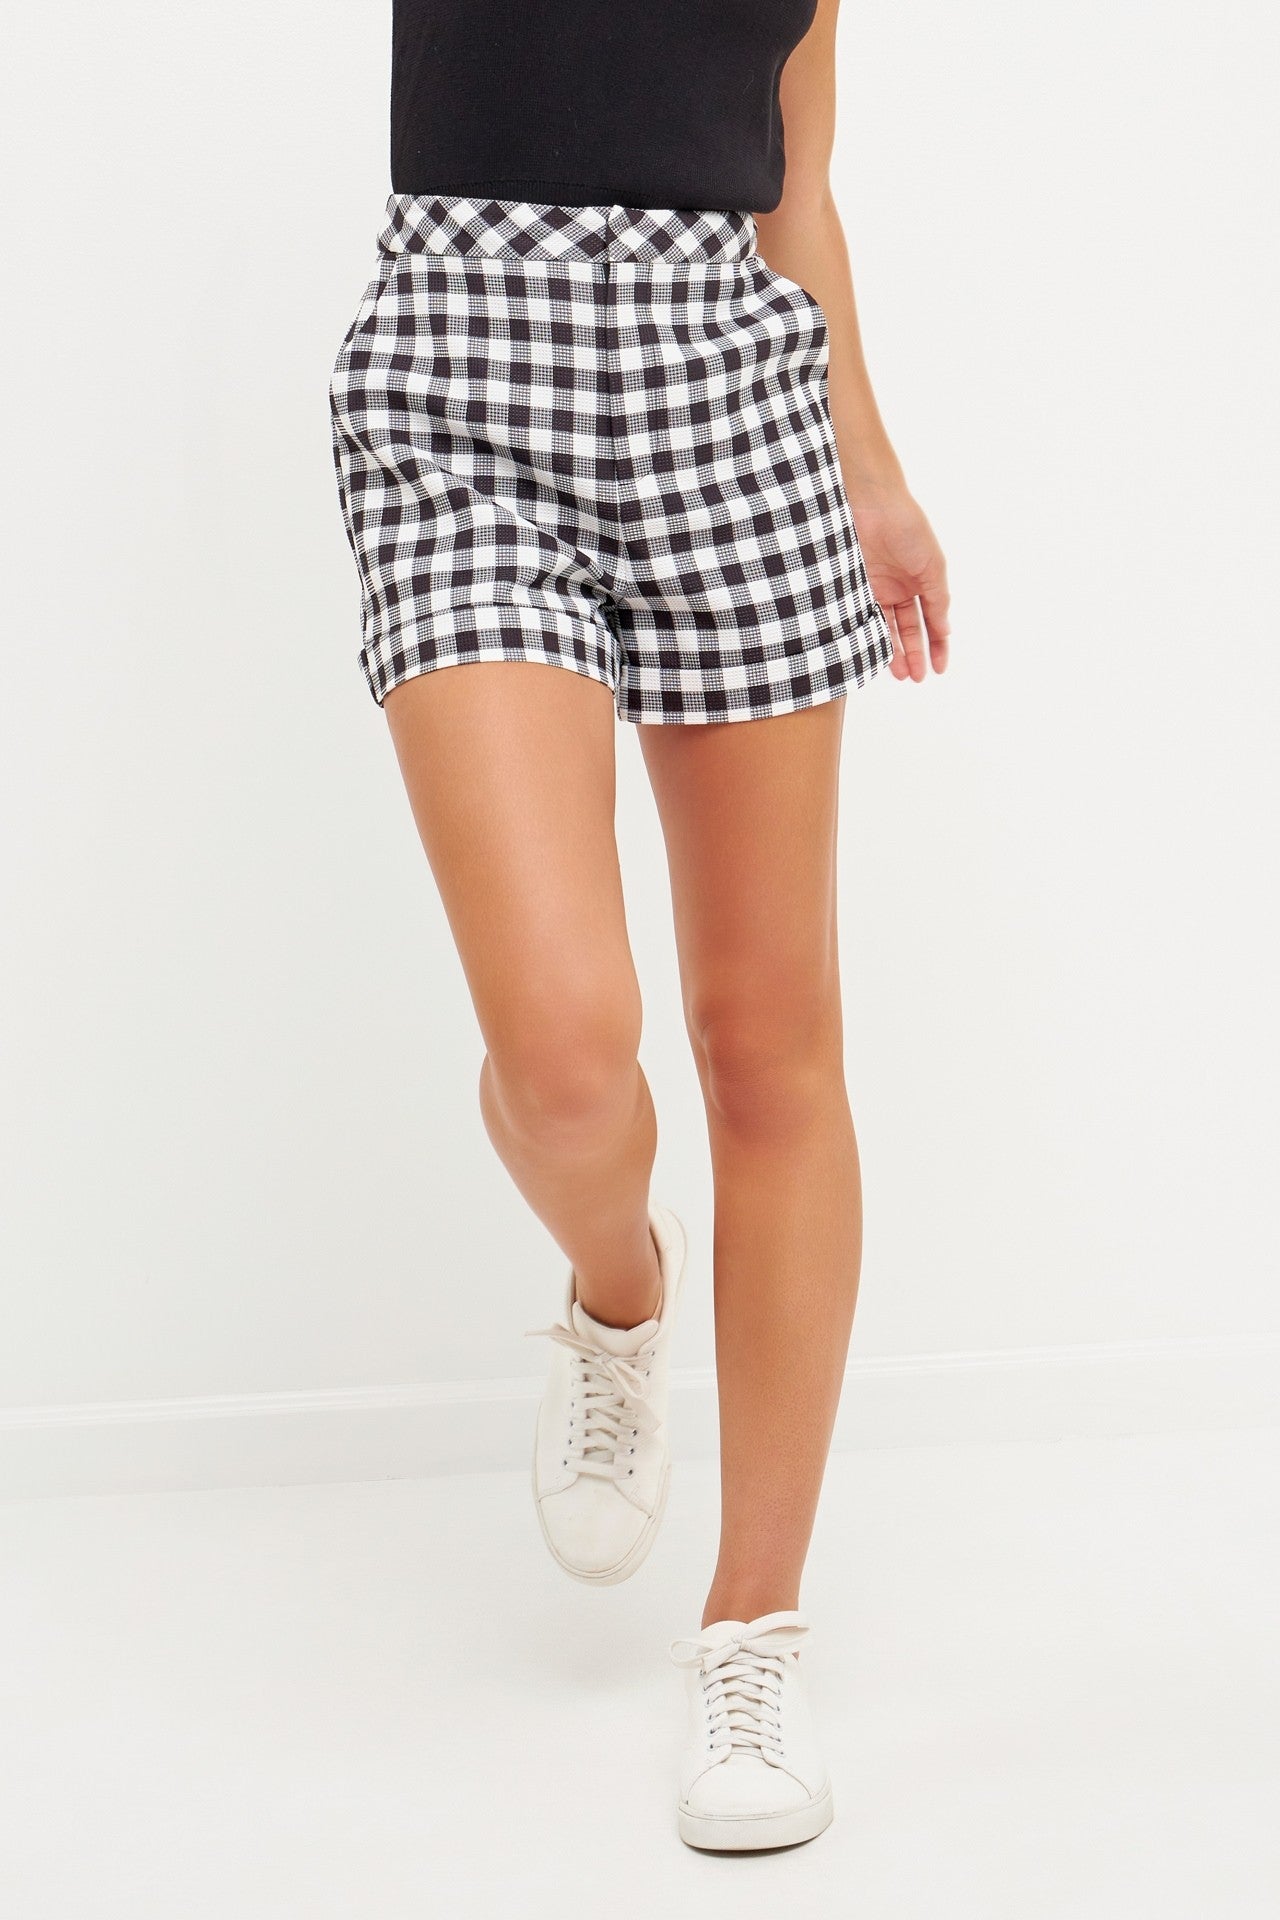 TWIGGY CHECK SHORTS IN BLACK